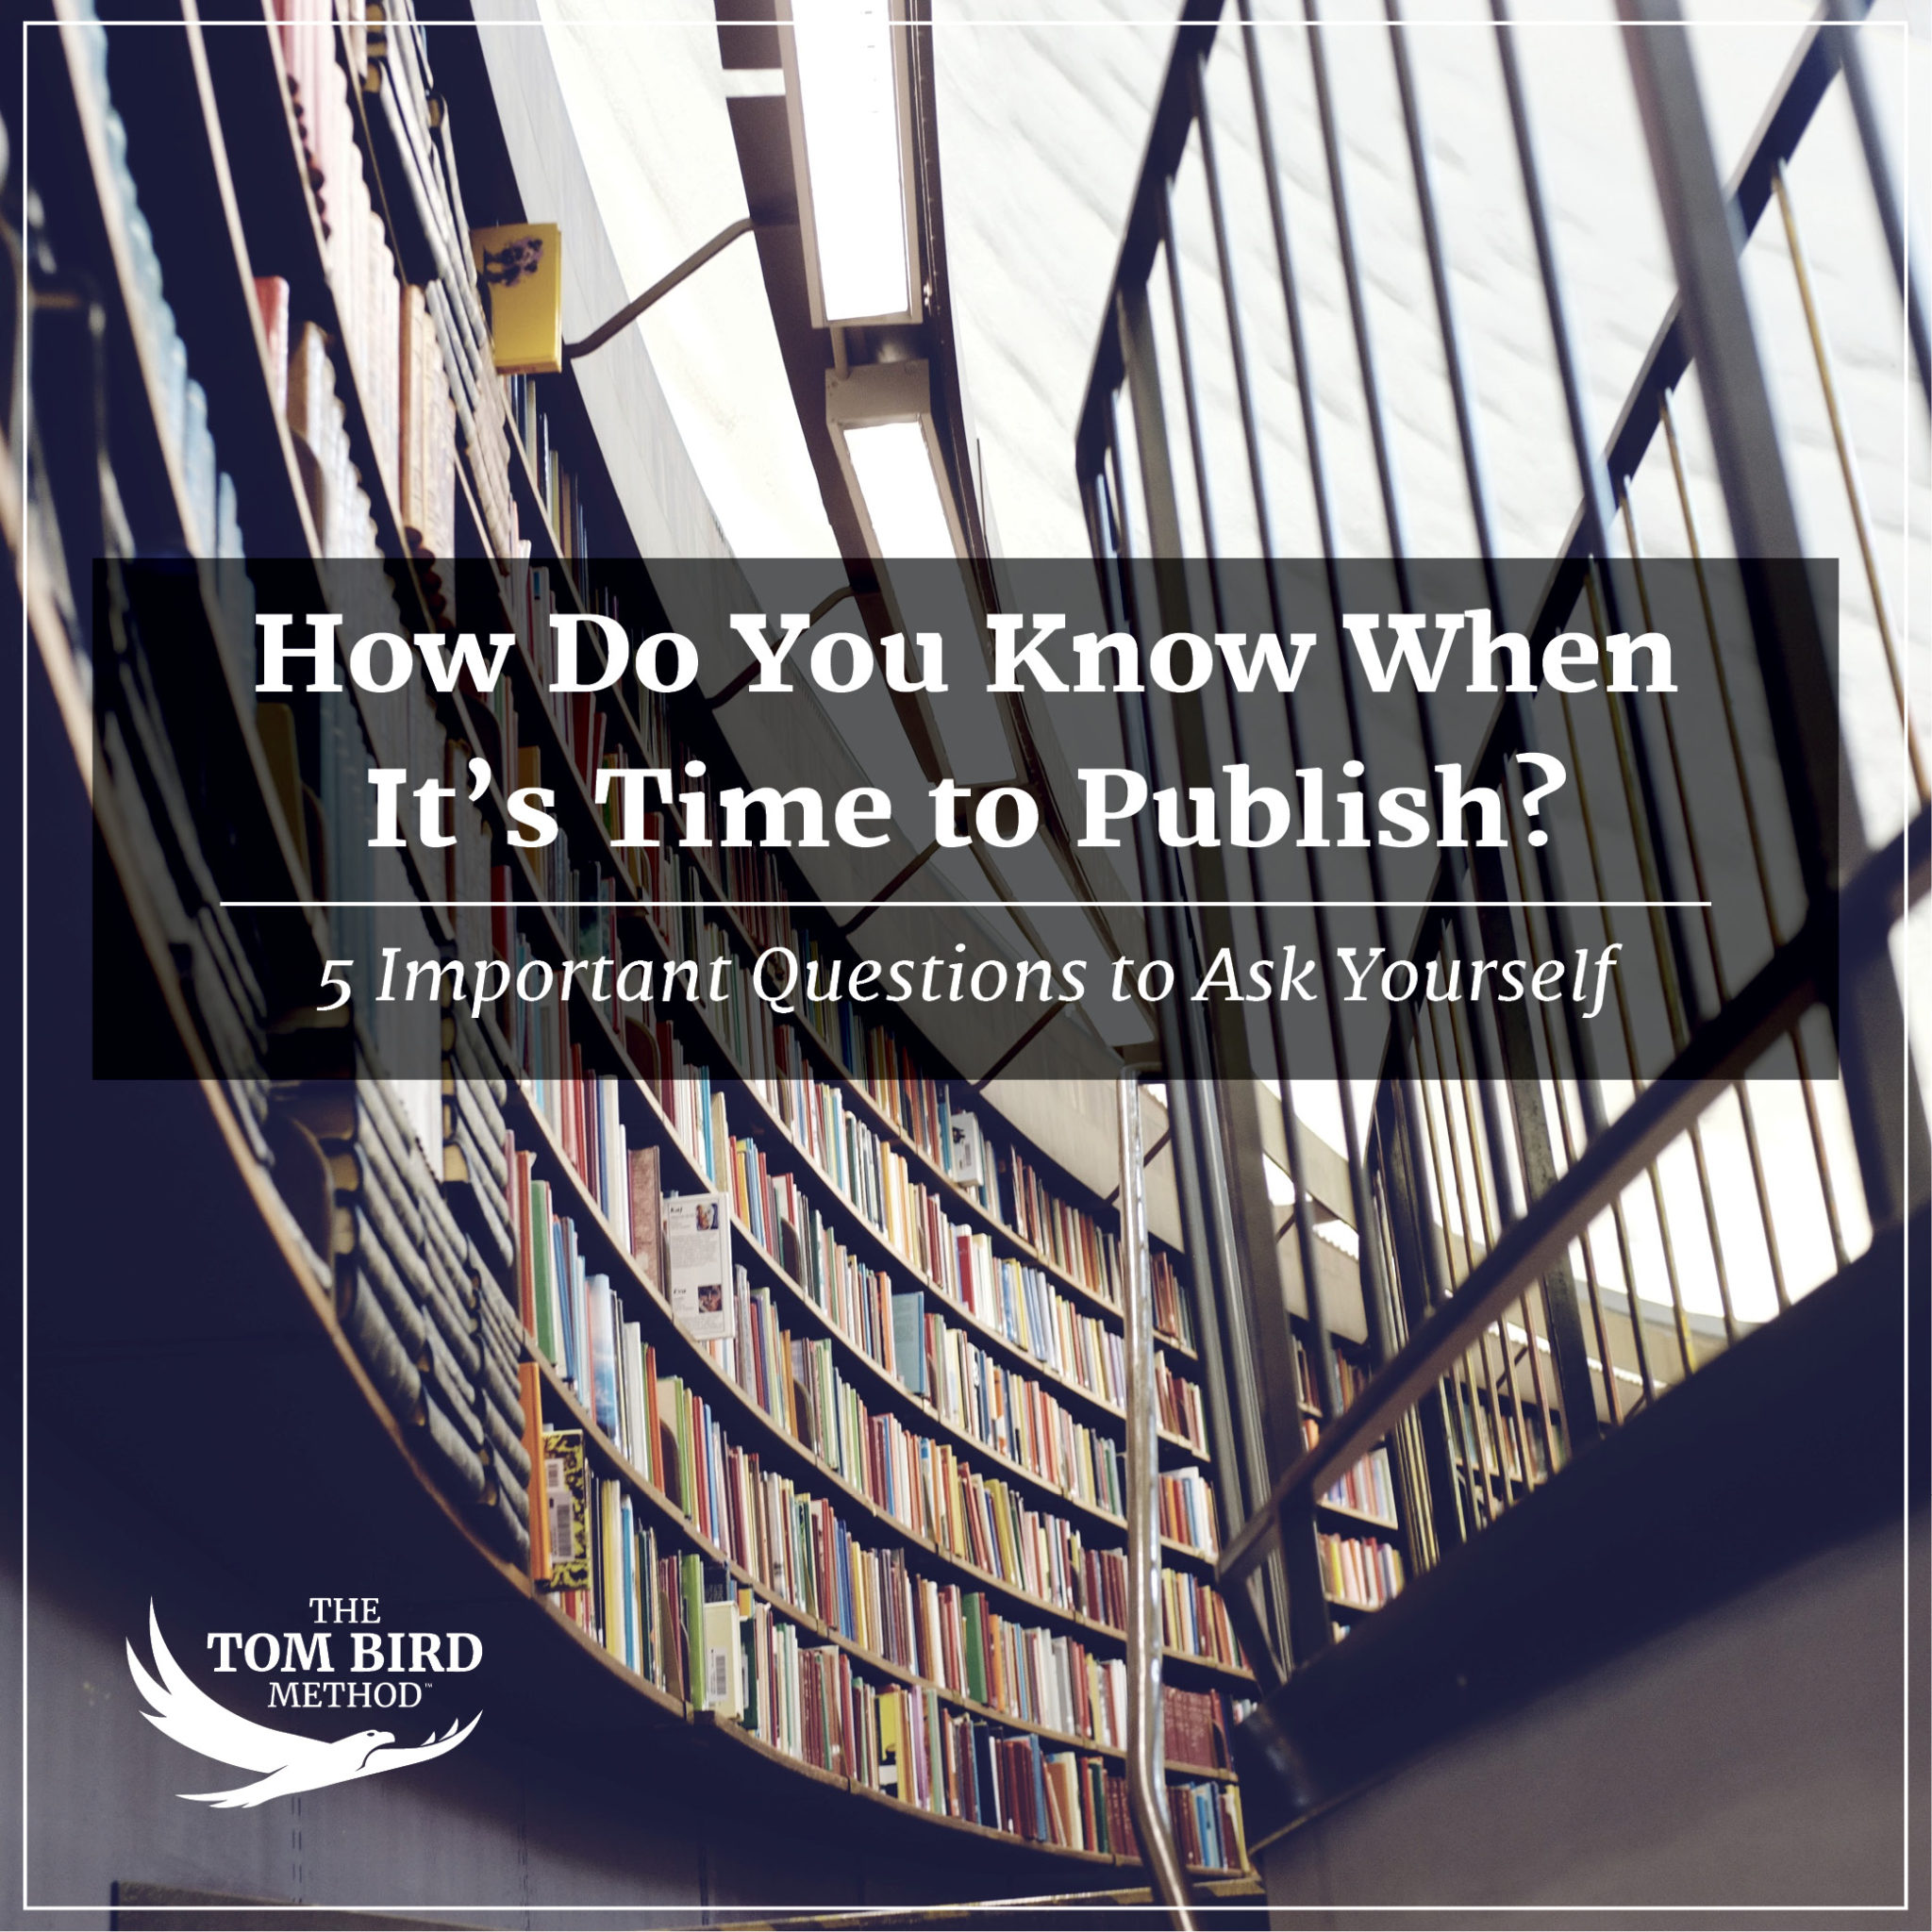 How Do You Know When It's Time to Publish?